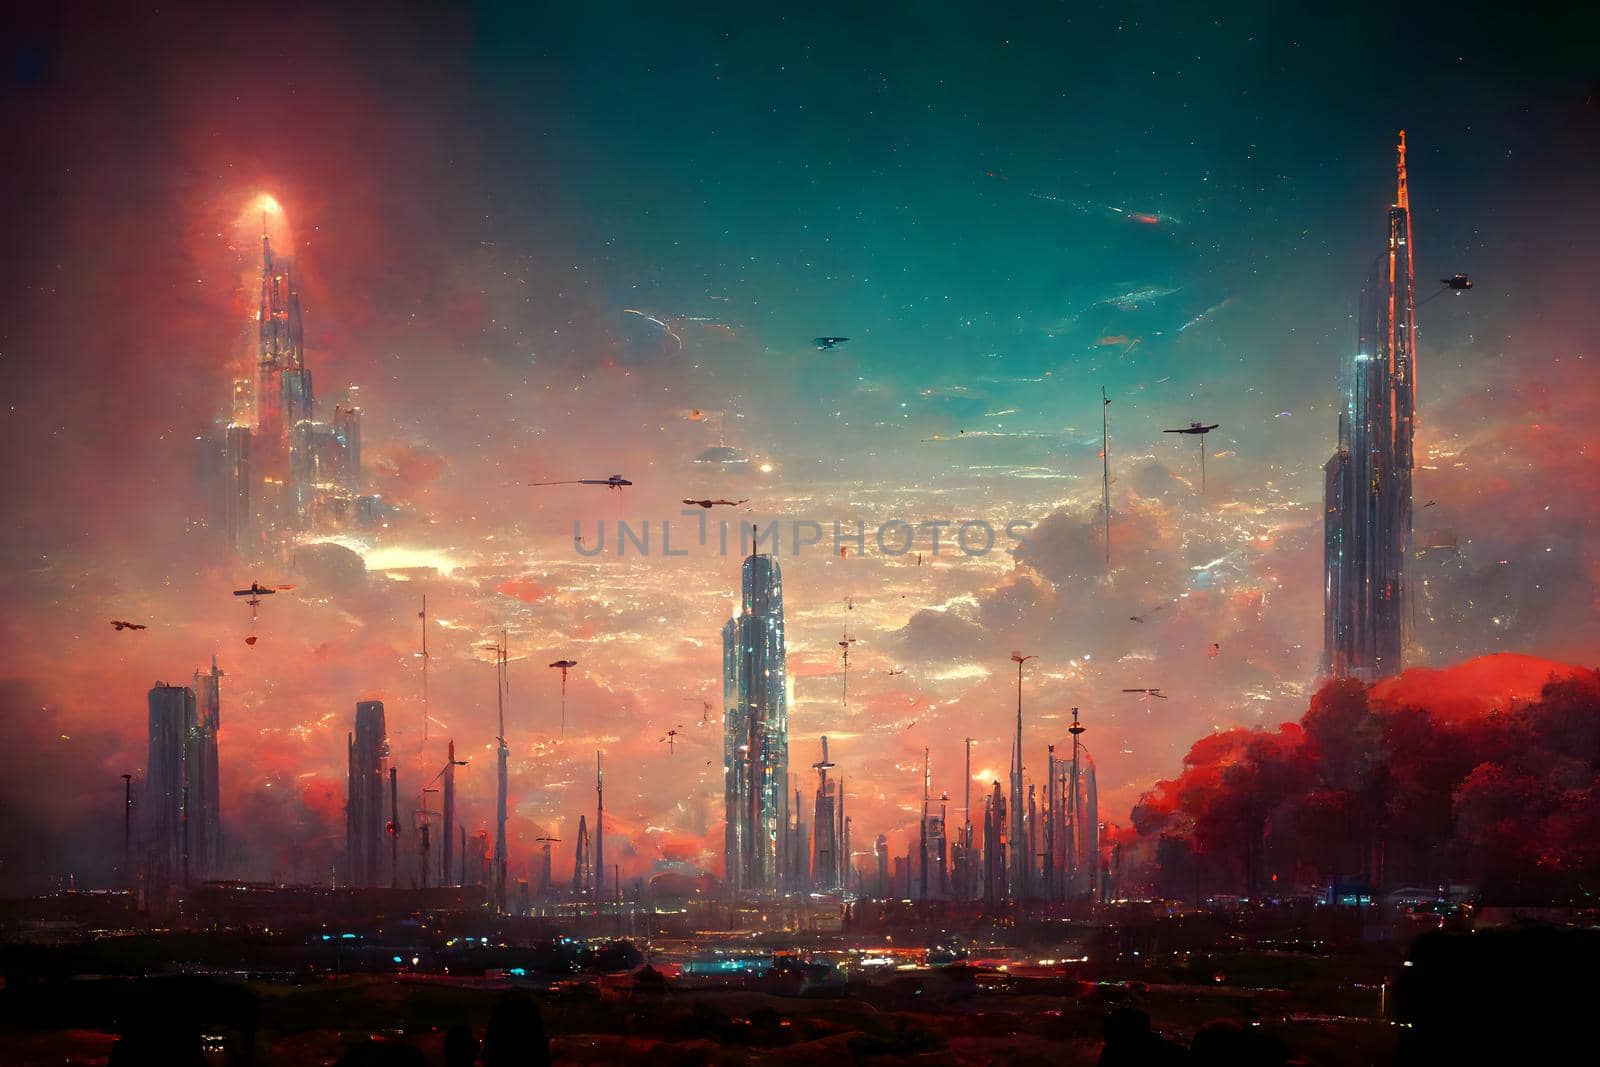 dreamy futuristic city in space with colorful clouds and high rise spire-like skyscrapers, neural network generated art by z1b